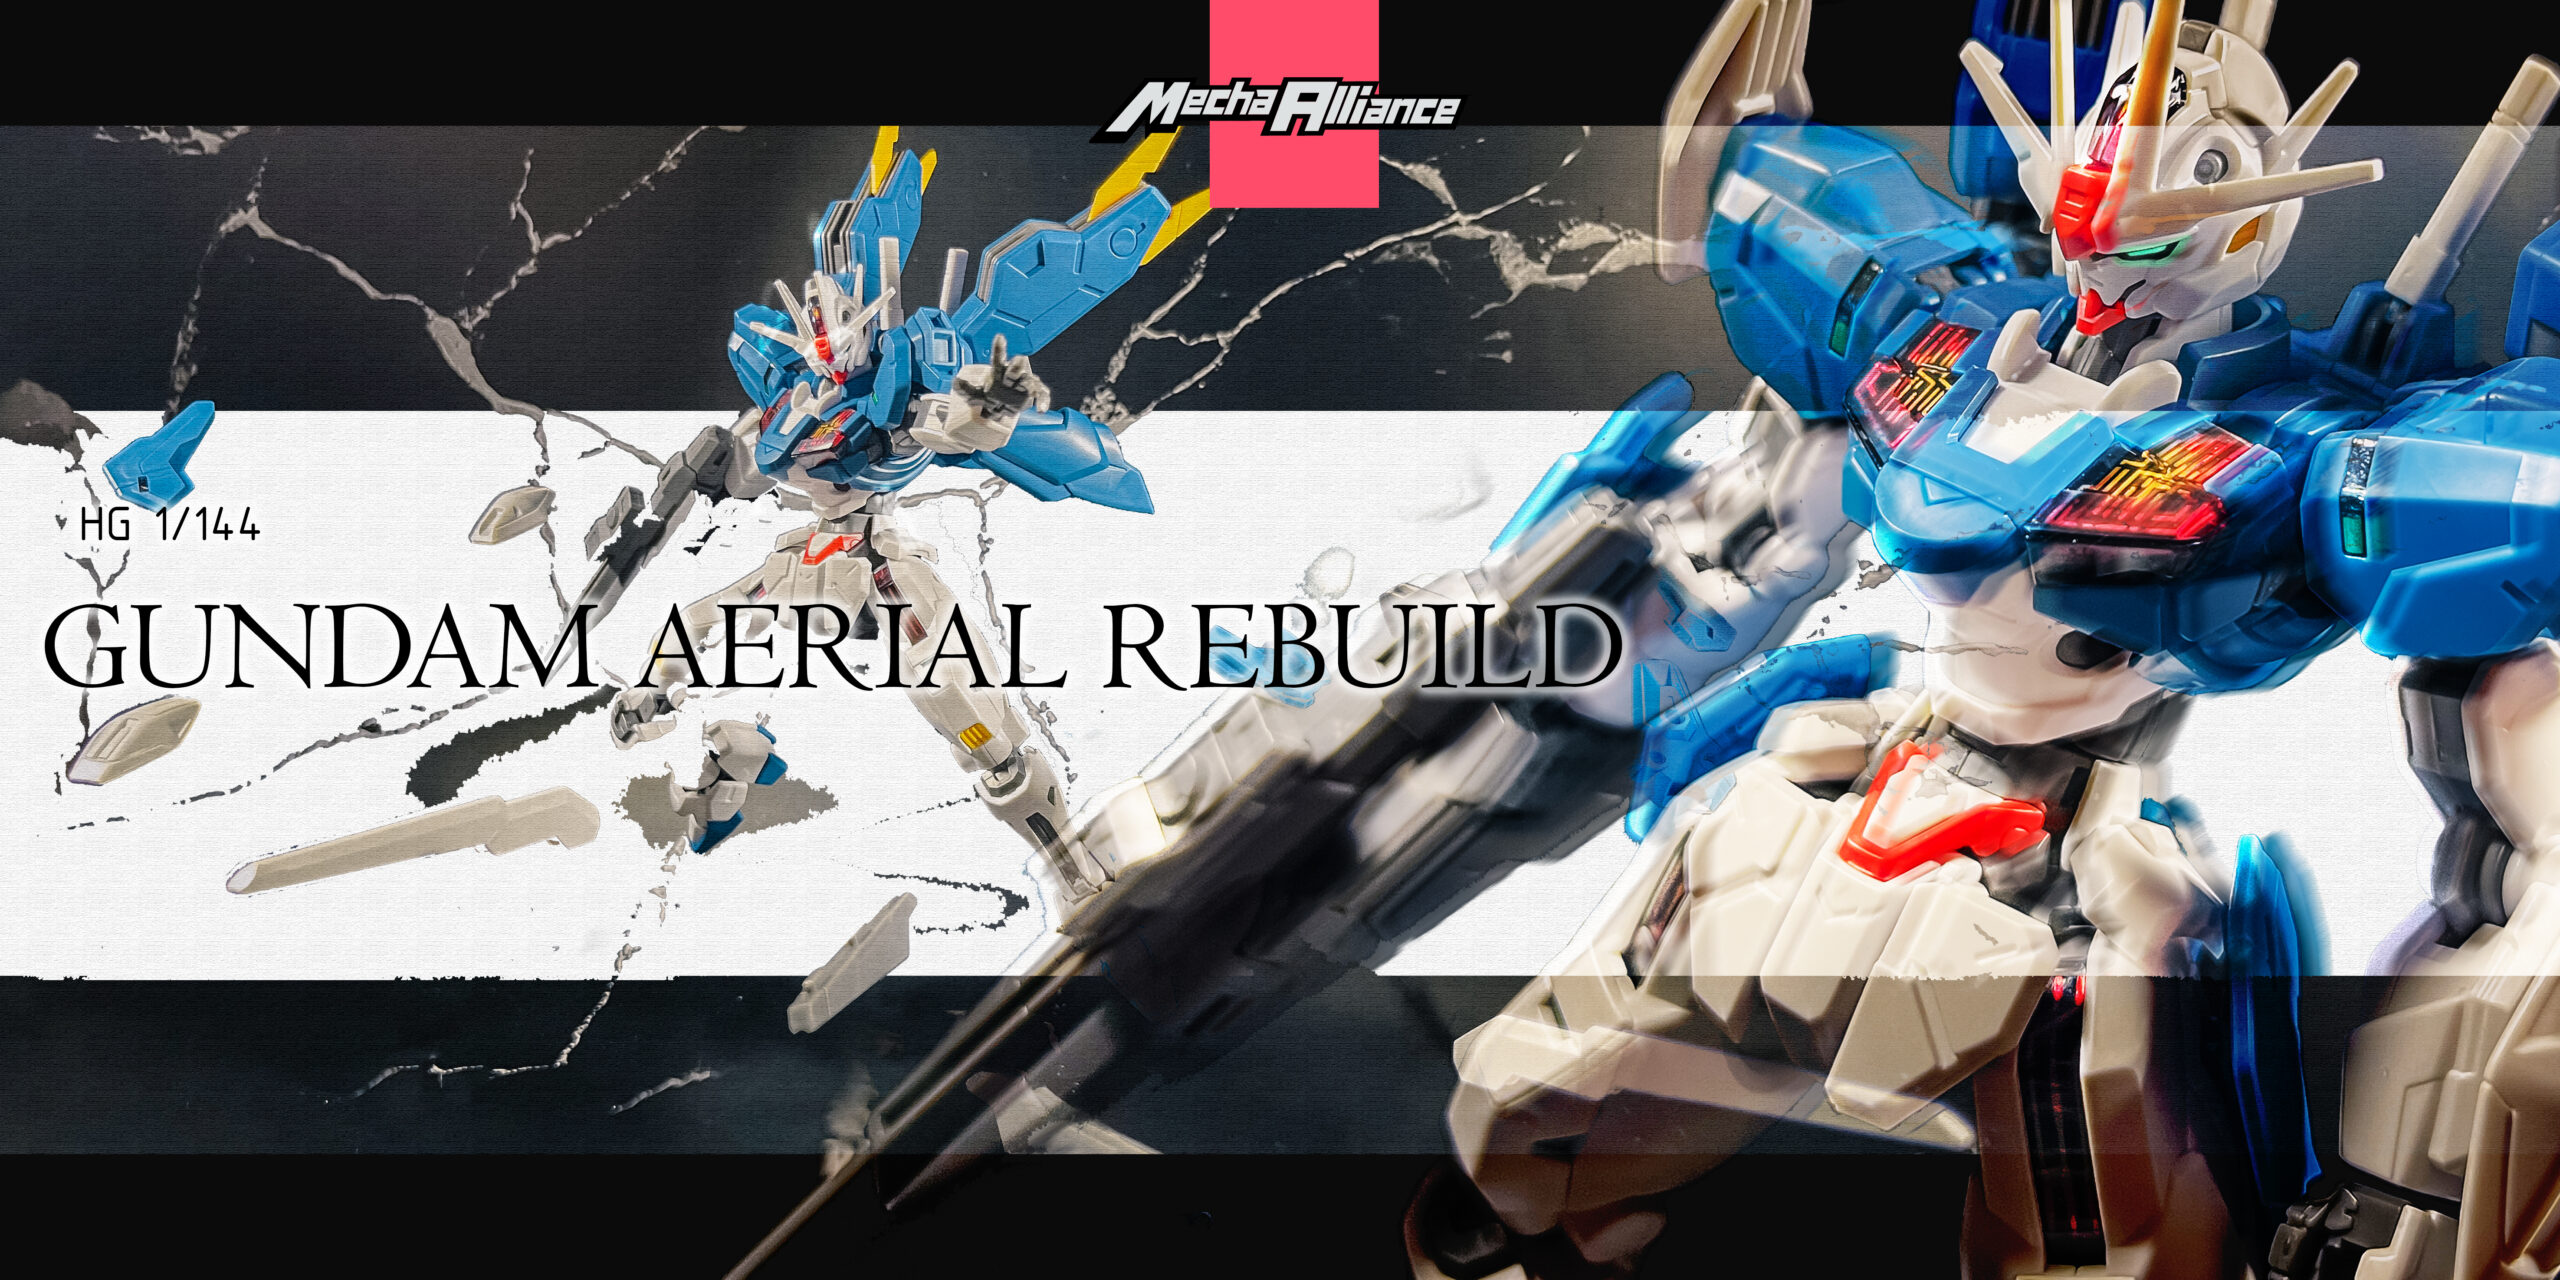 HG 1/144 Gundam Aerial - Release Info, Box art and Official Images